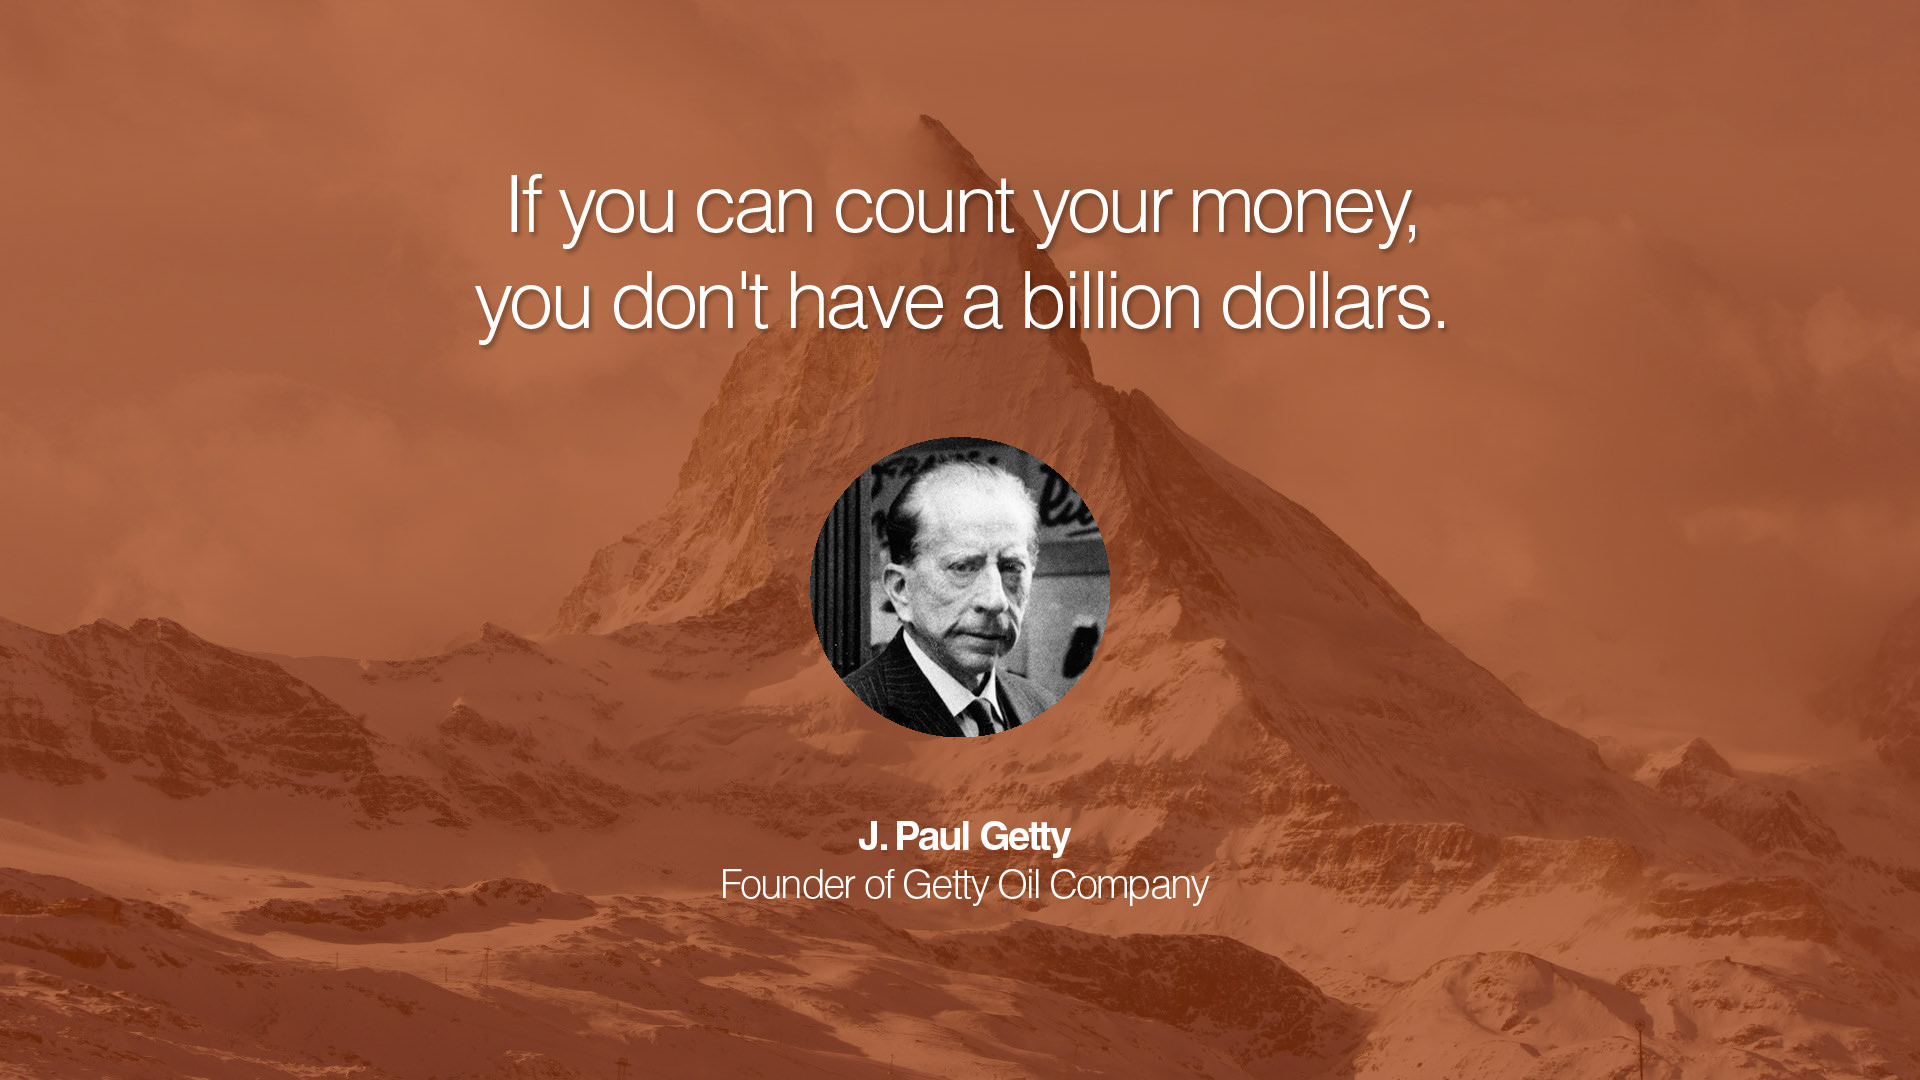 21 Inspirational Entrepreneur Quotes by Famous Billionaires and